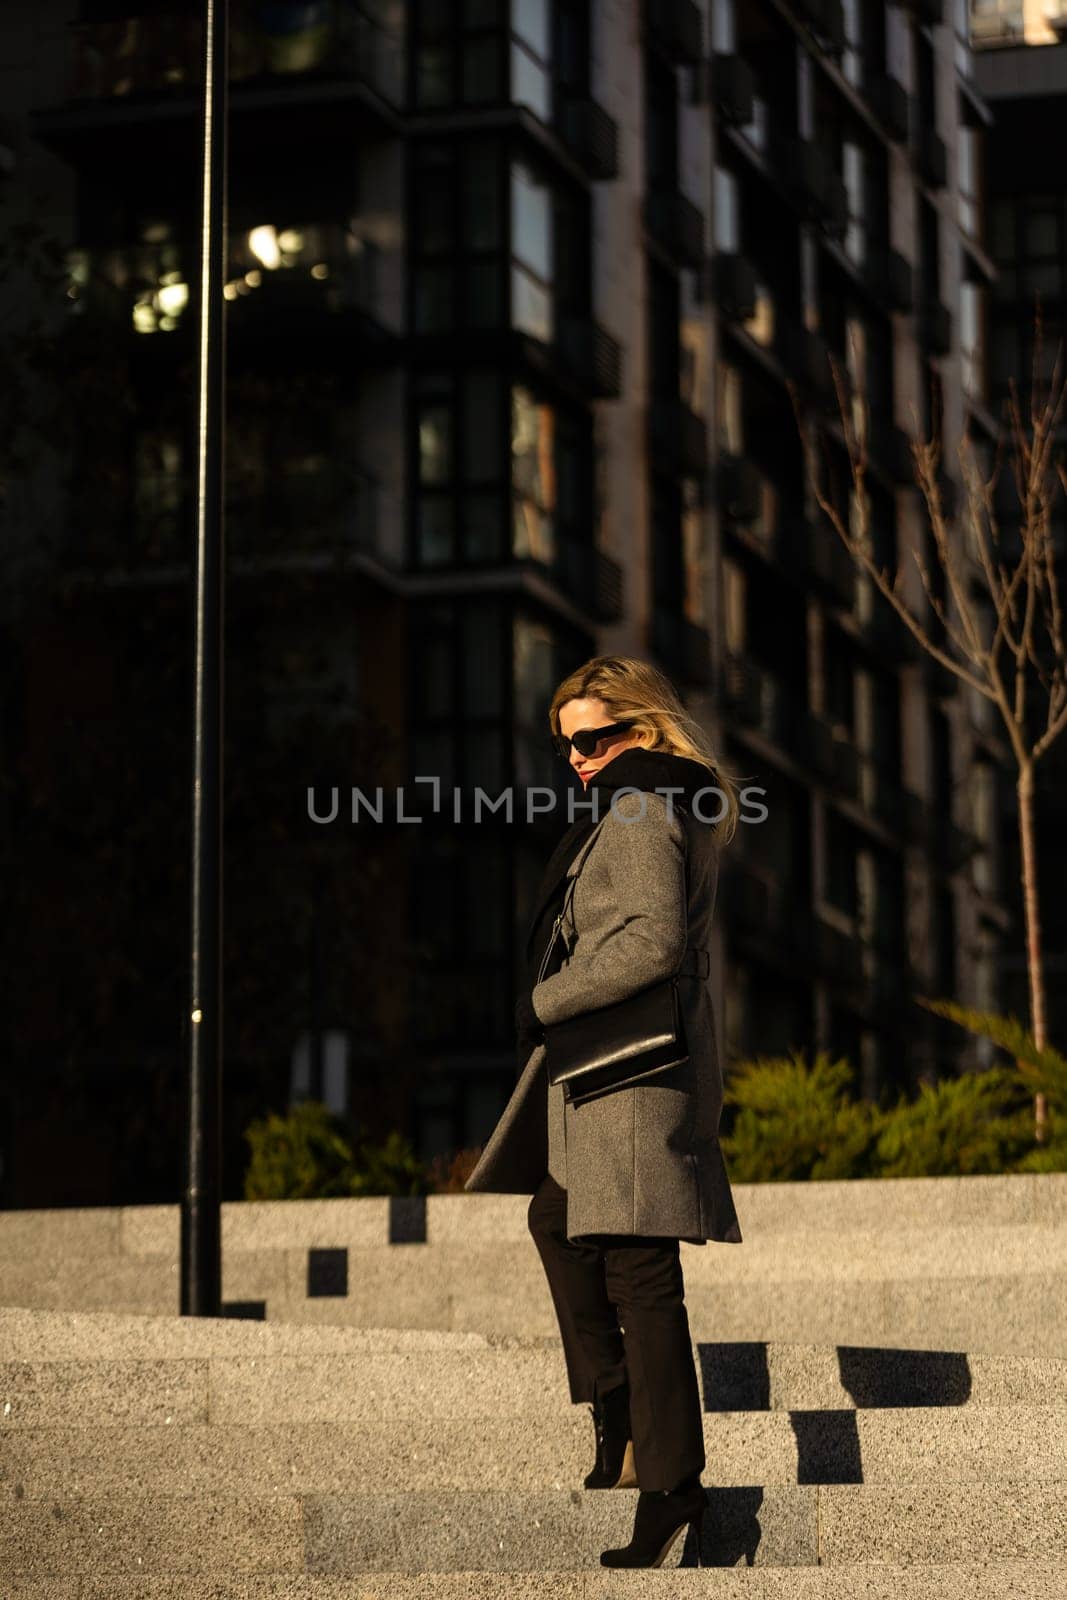 The girl in a coat walks around the city on a sunny day by Andelov13